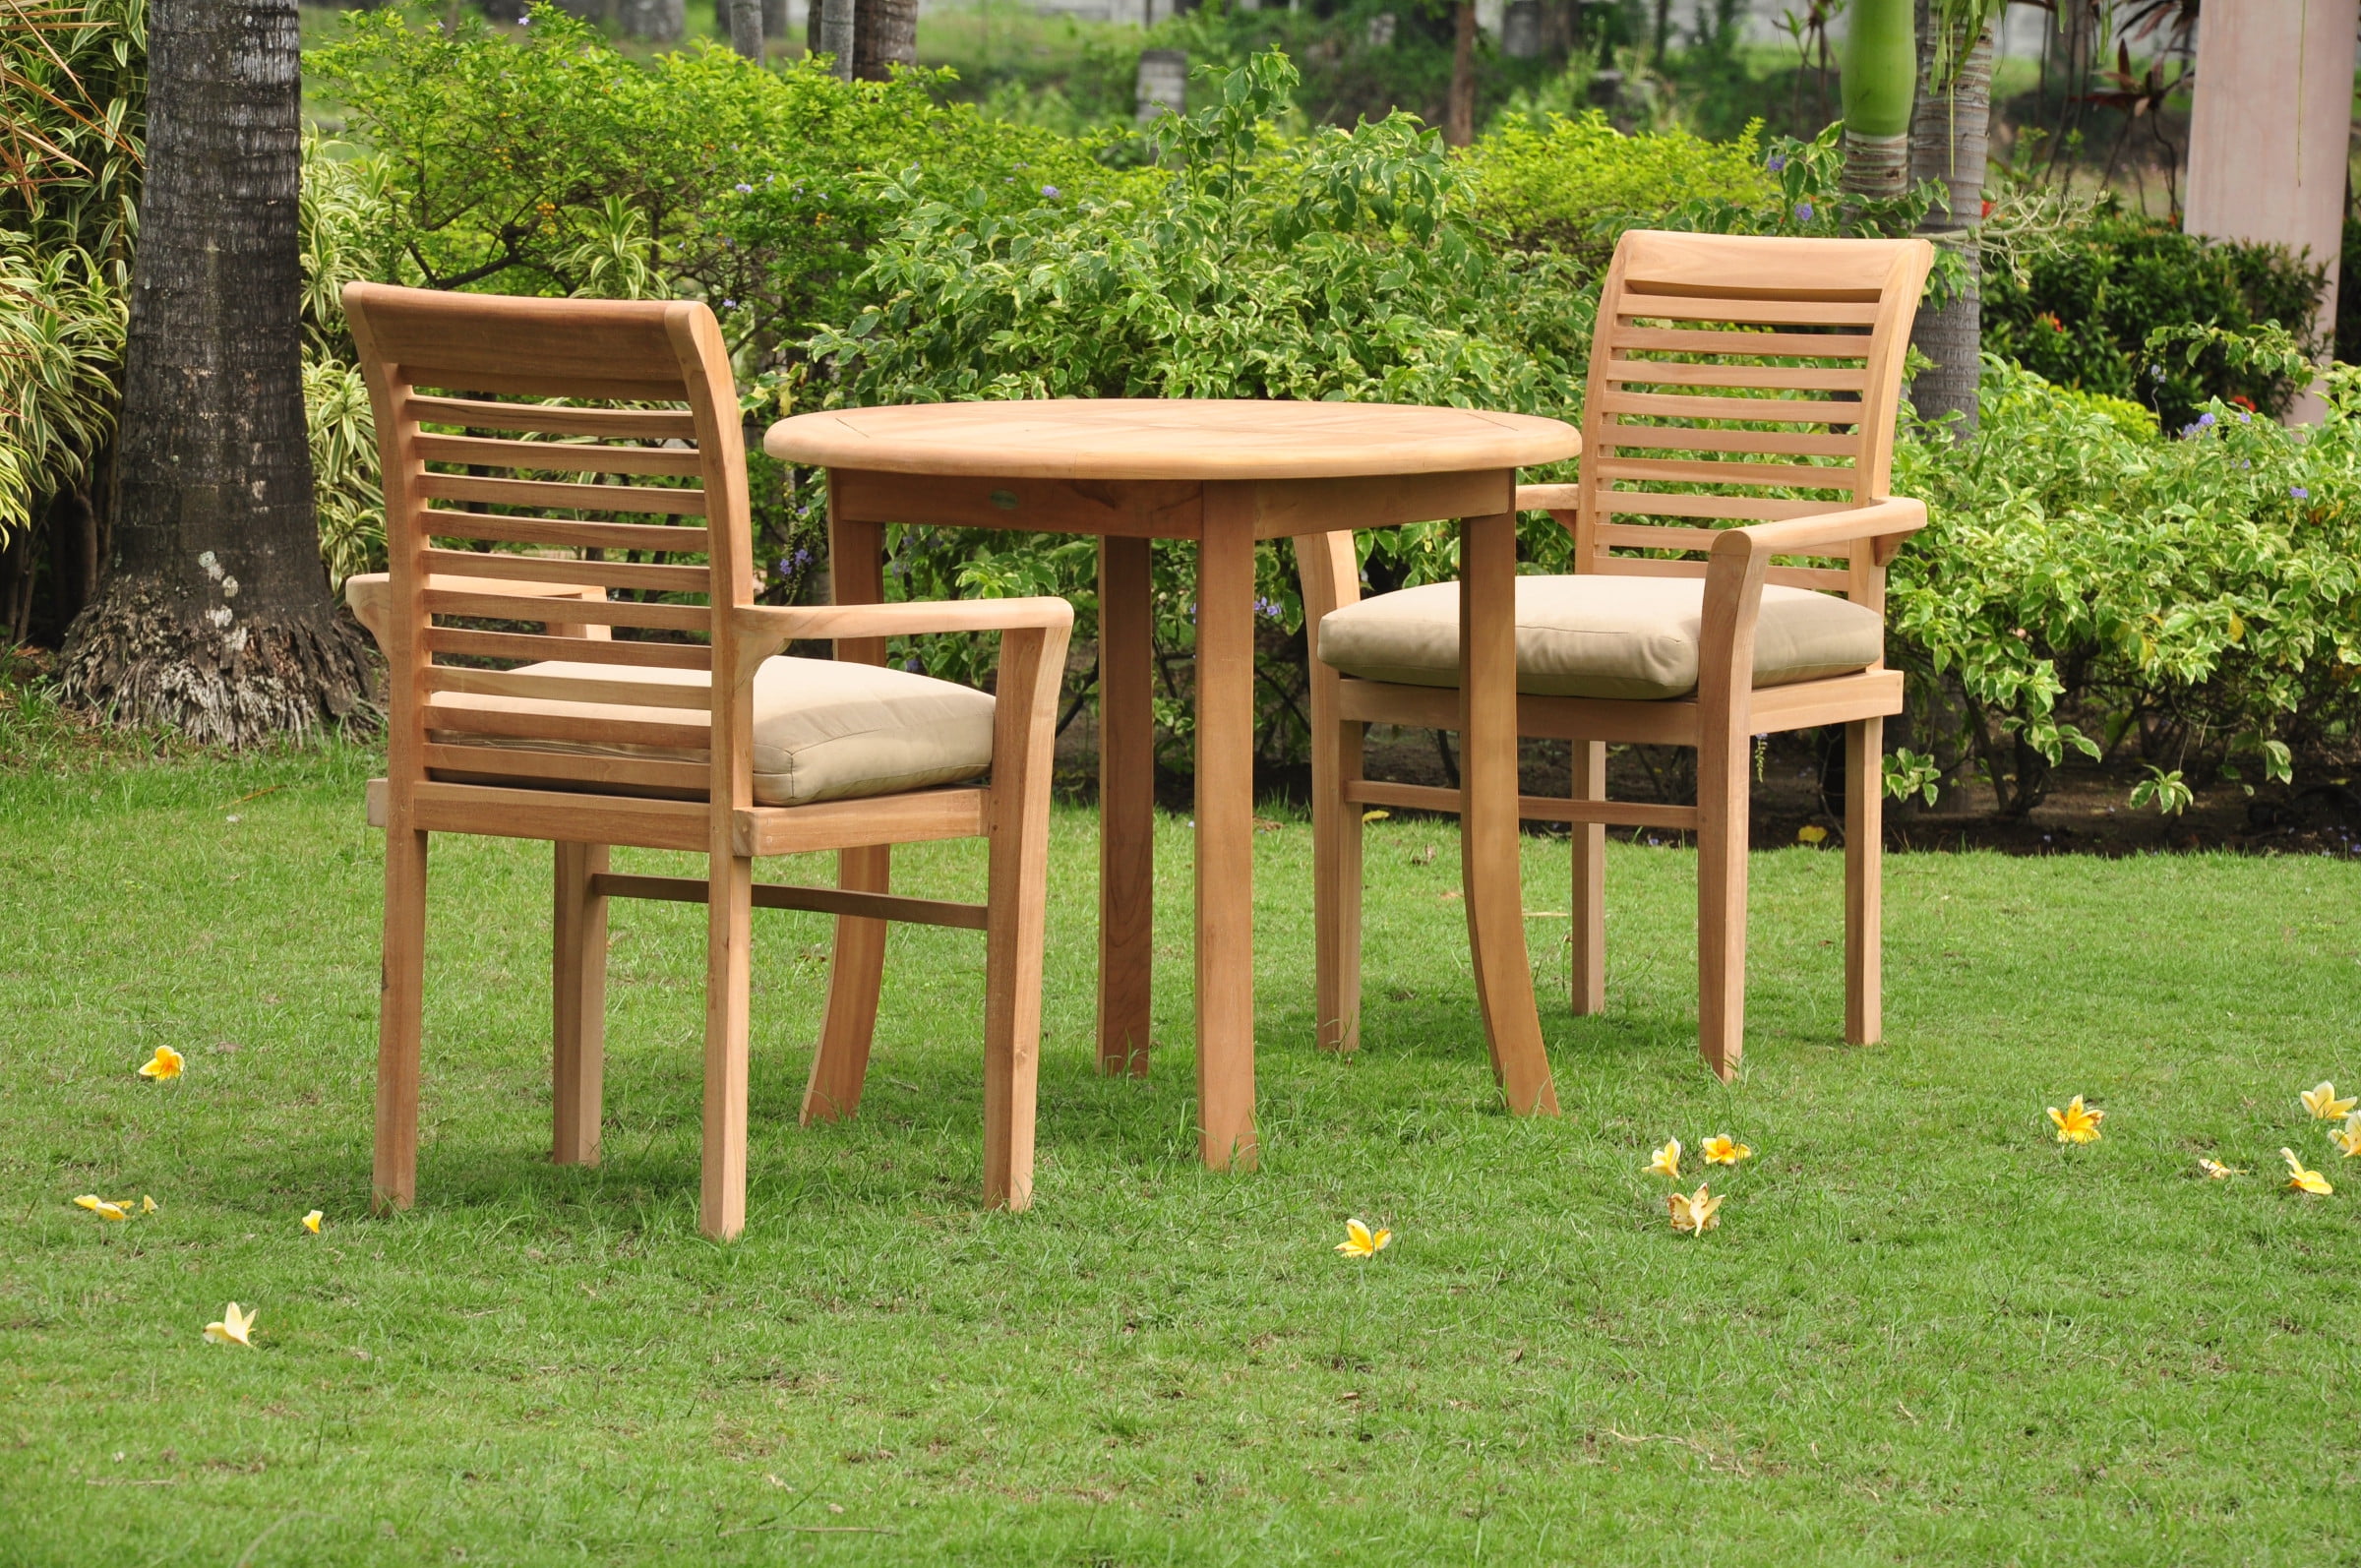 Teak Furniture For Small Spaces